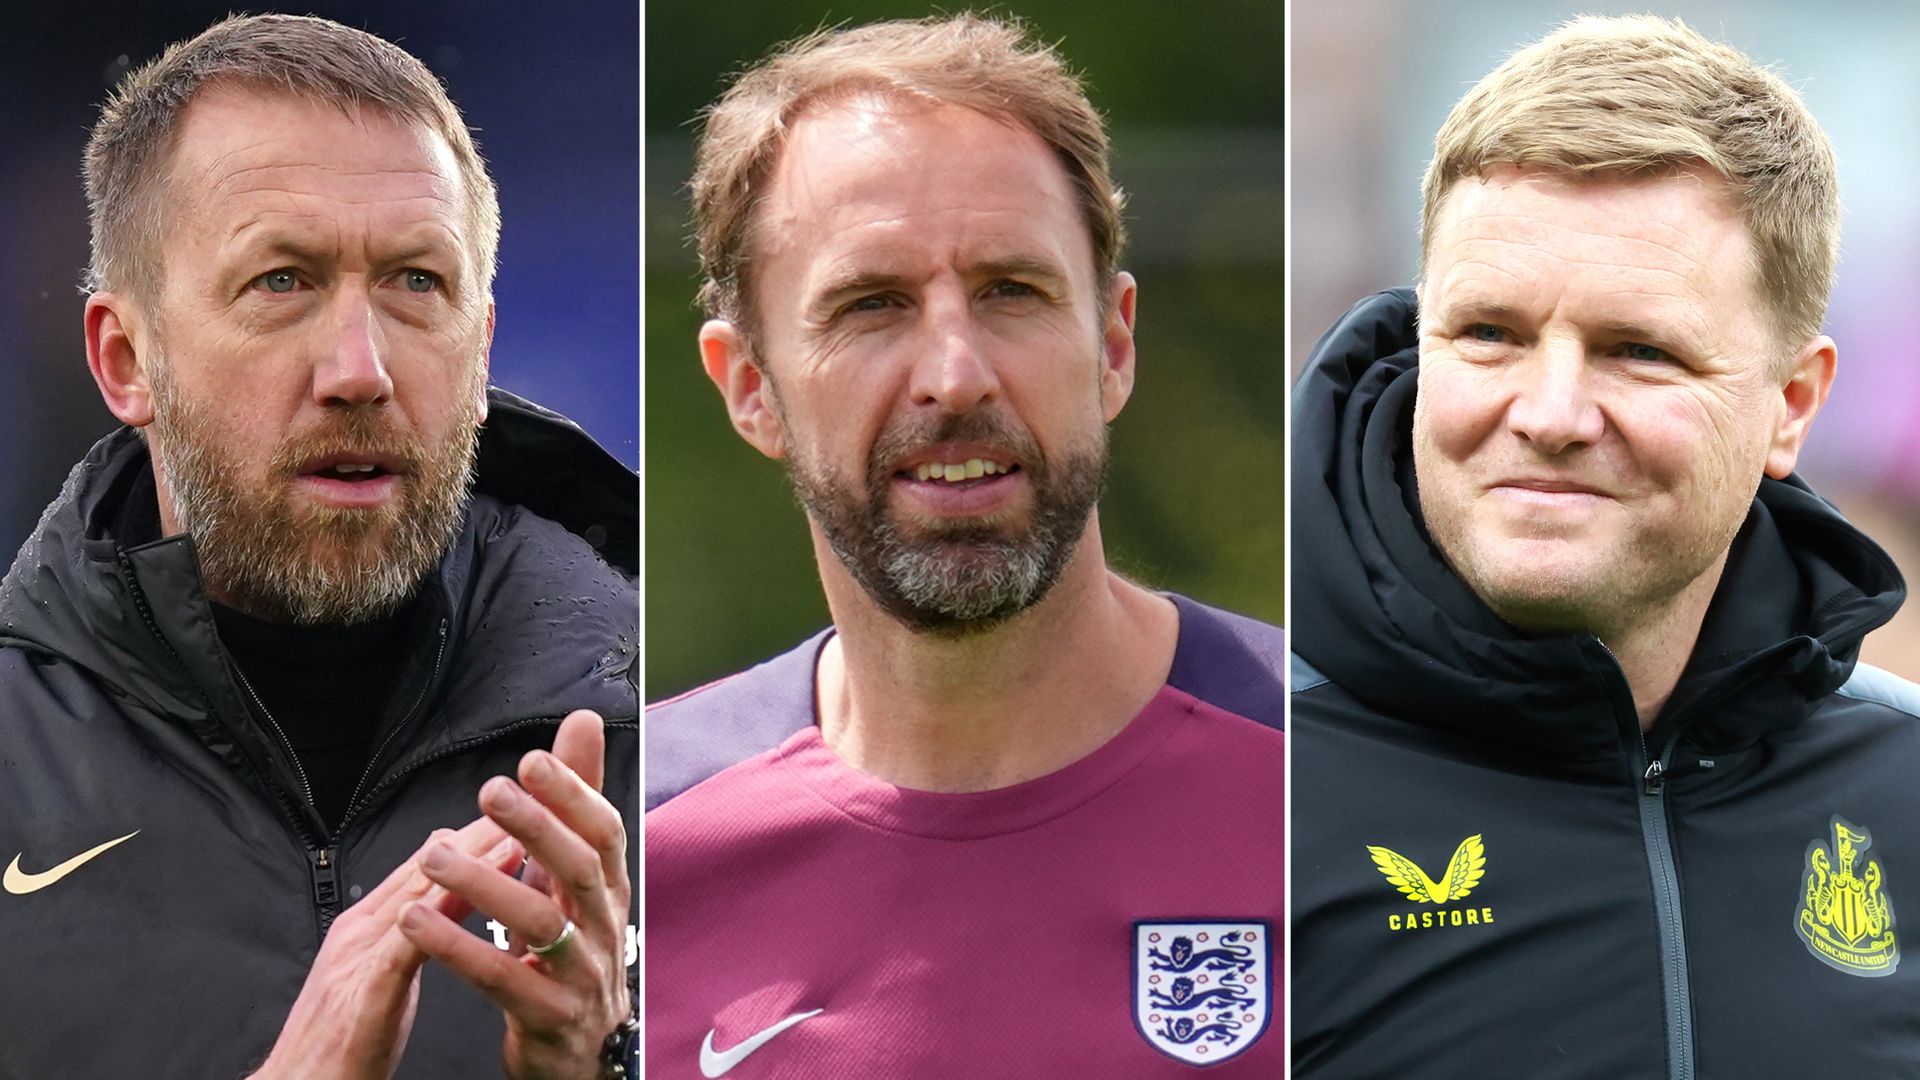 Who could replace Gareth Southgate as England manager?